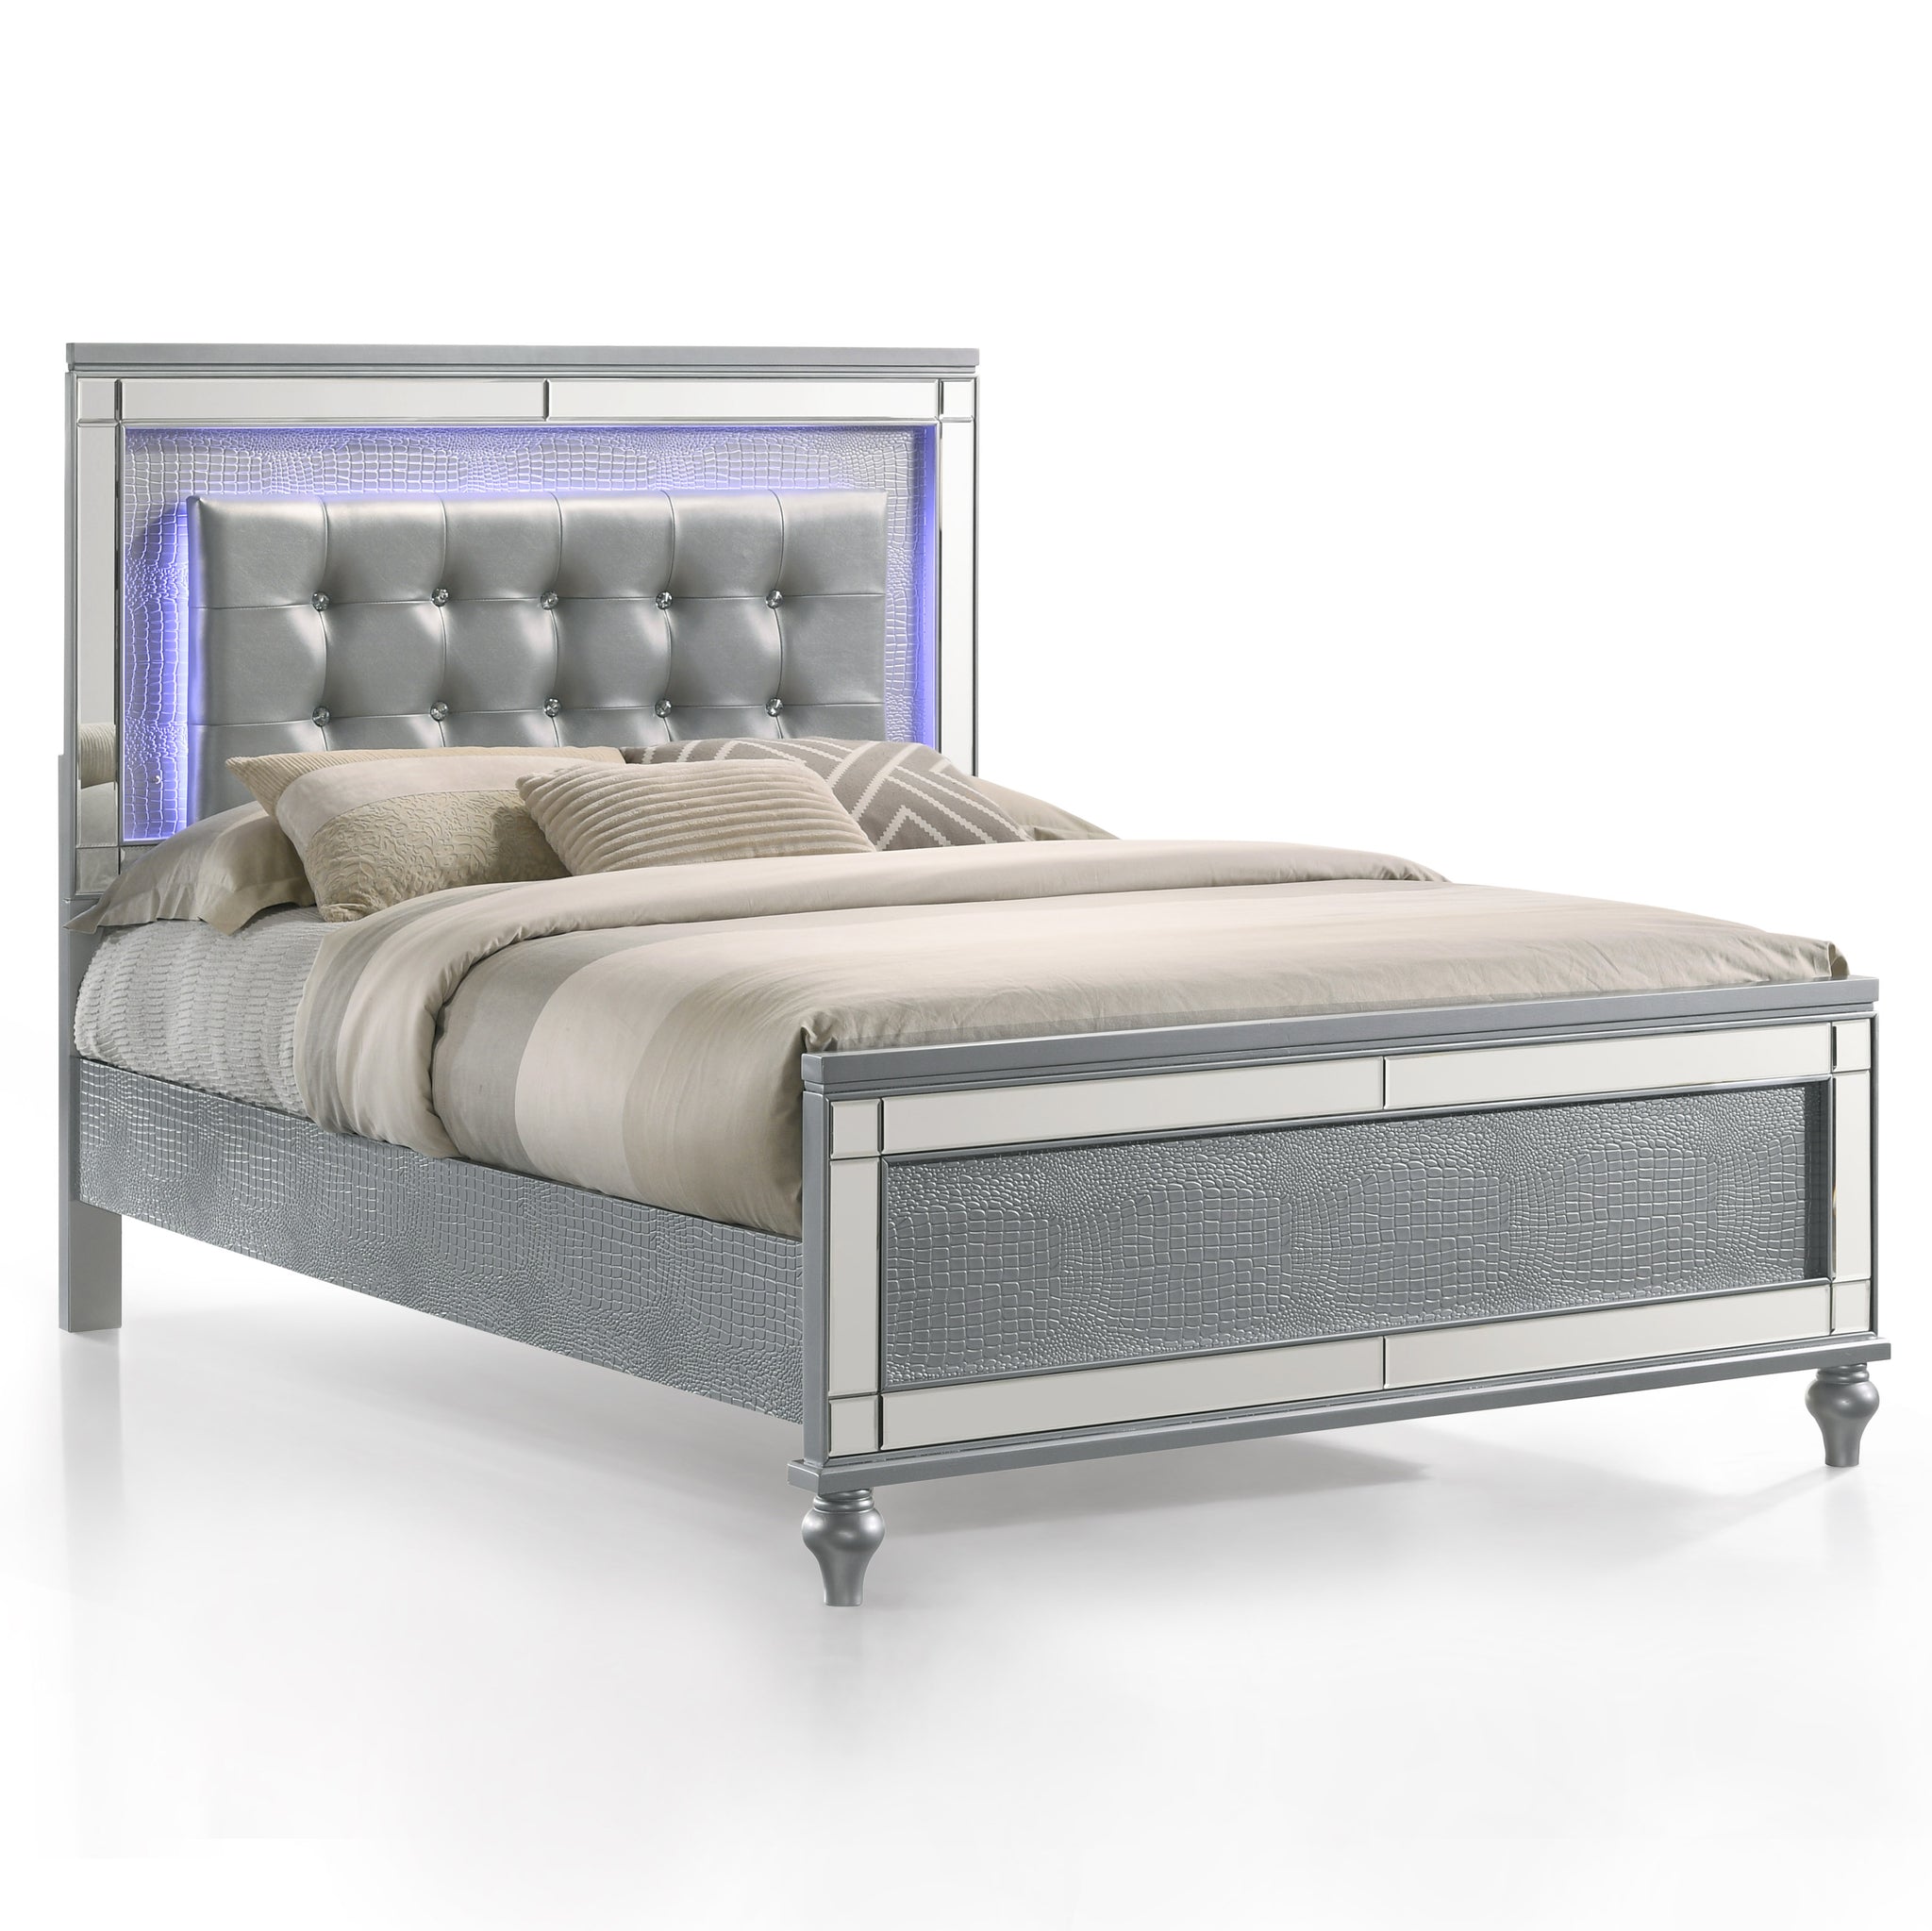 Valentino Bed w/ LED Lighting - Silver